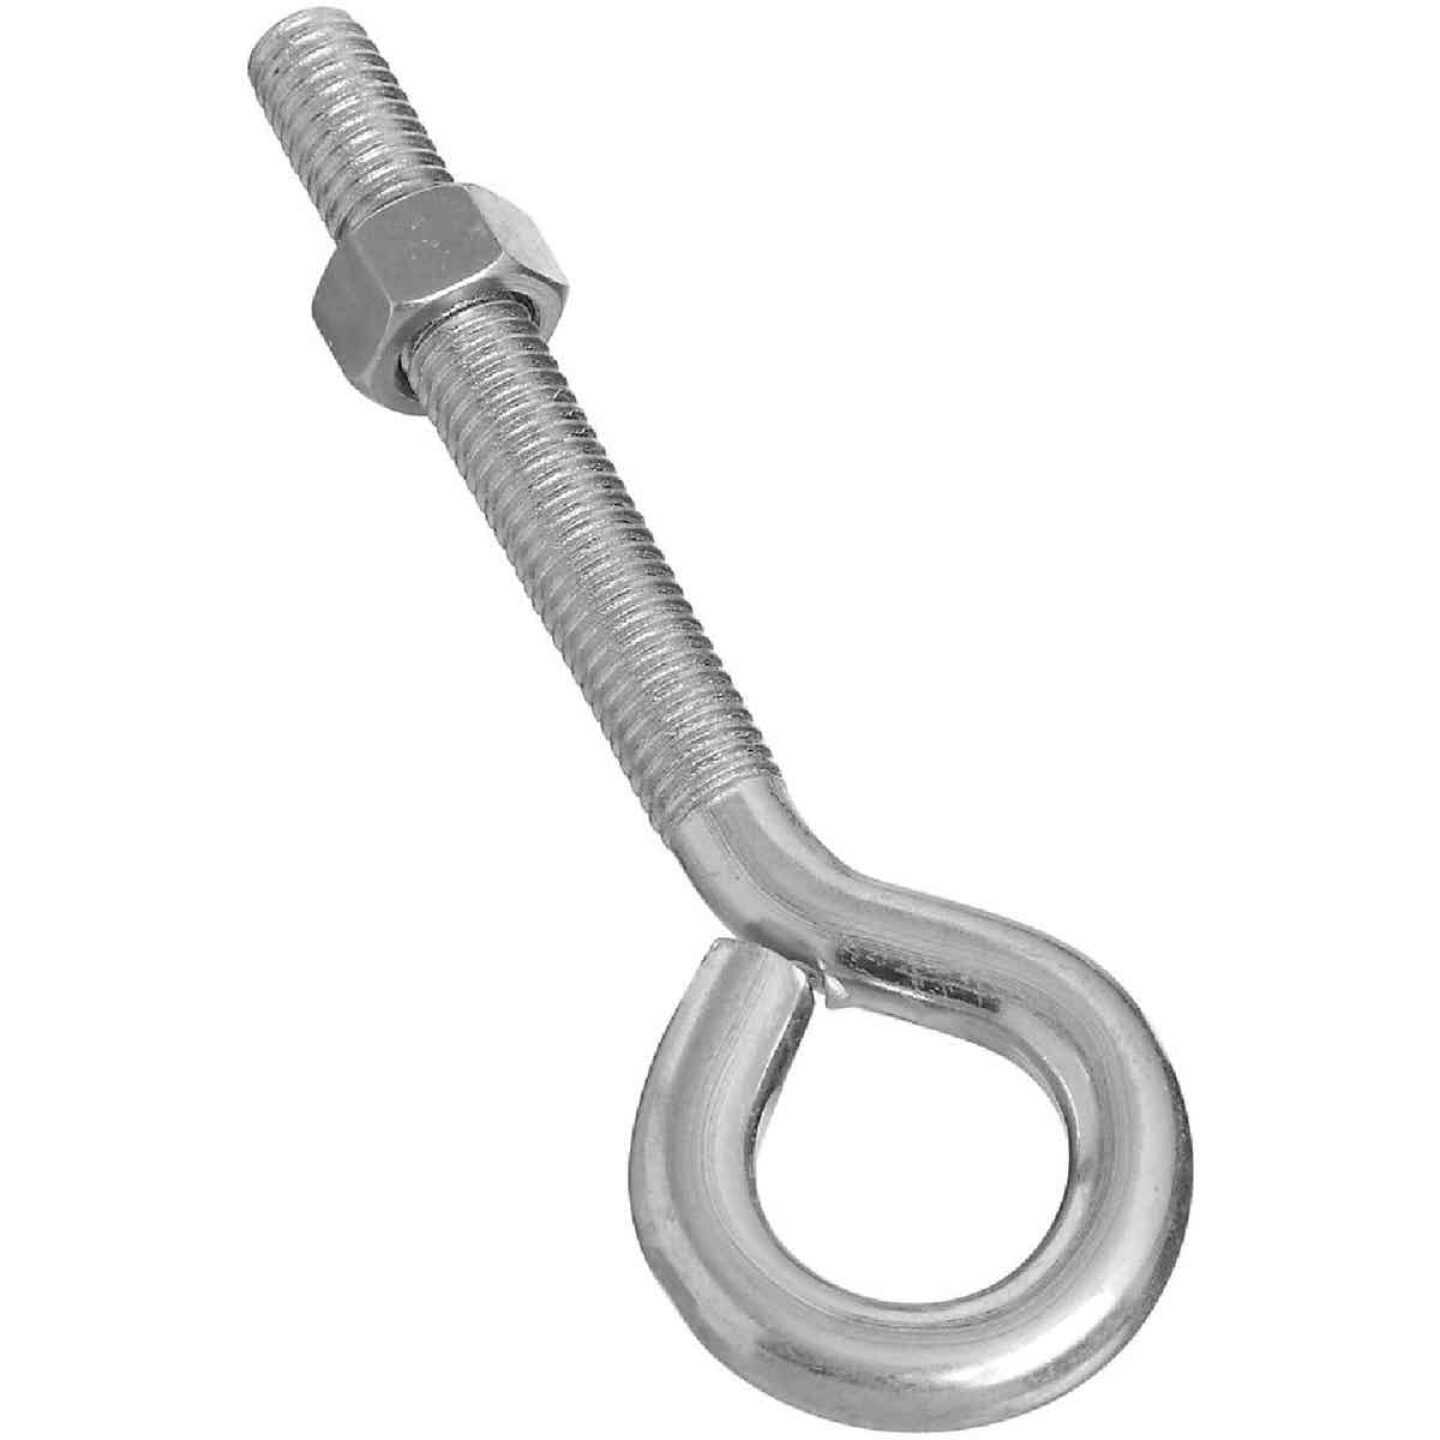 National 1/2 In. x 6 In. Zinc Eye Bolt with Hex Nut Image 1